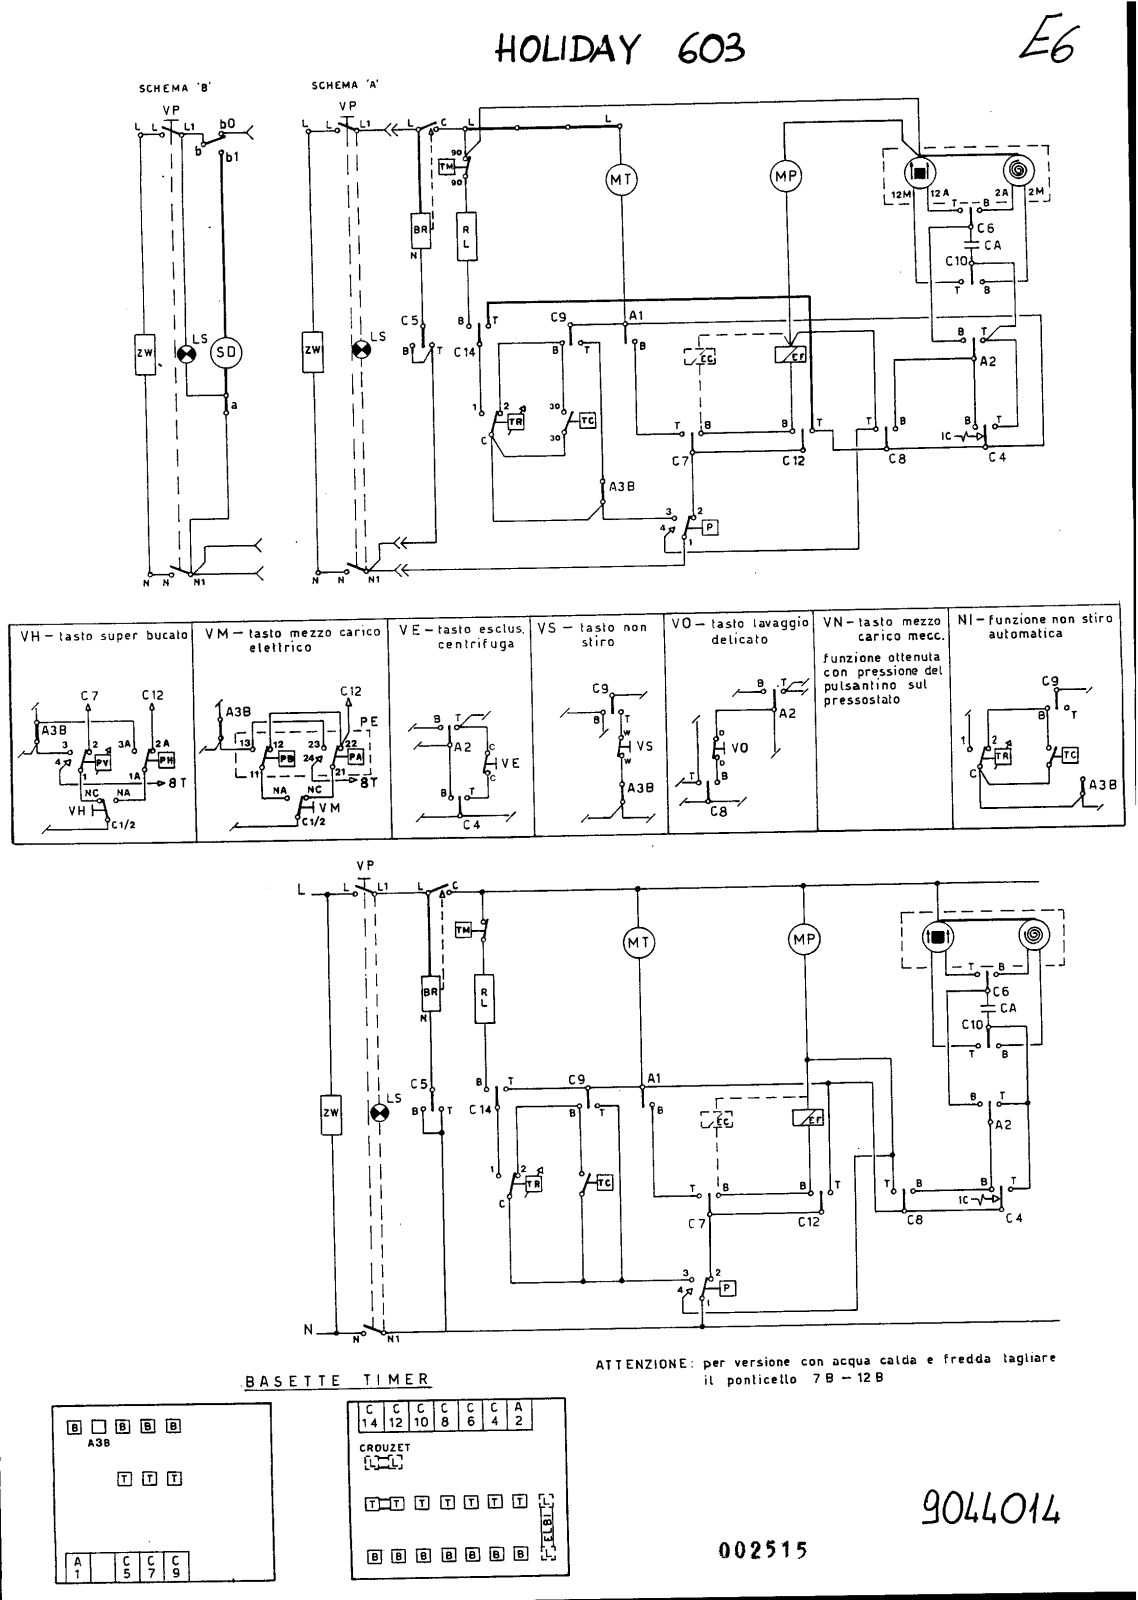 Candy Holiday 603 Schematic